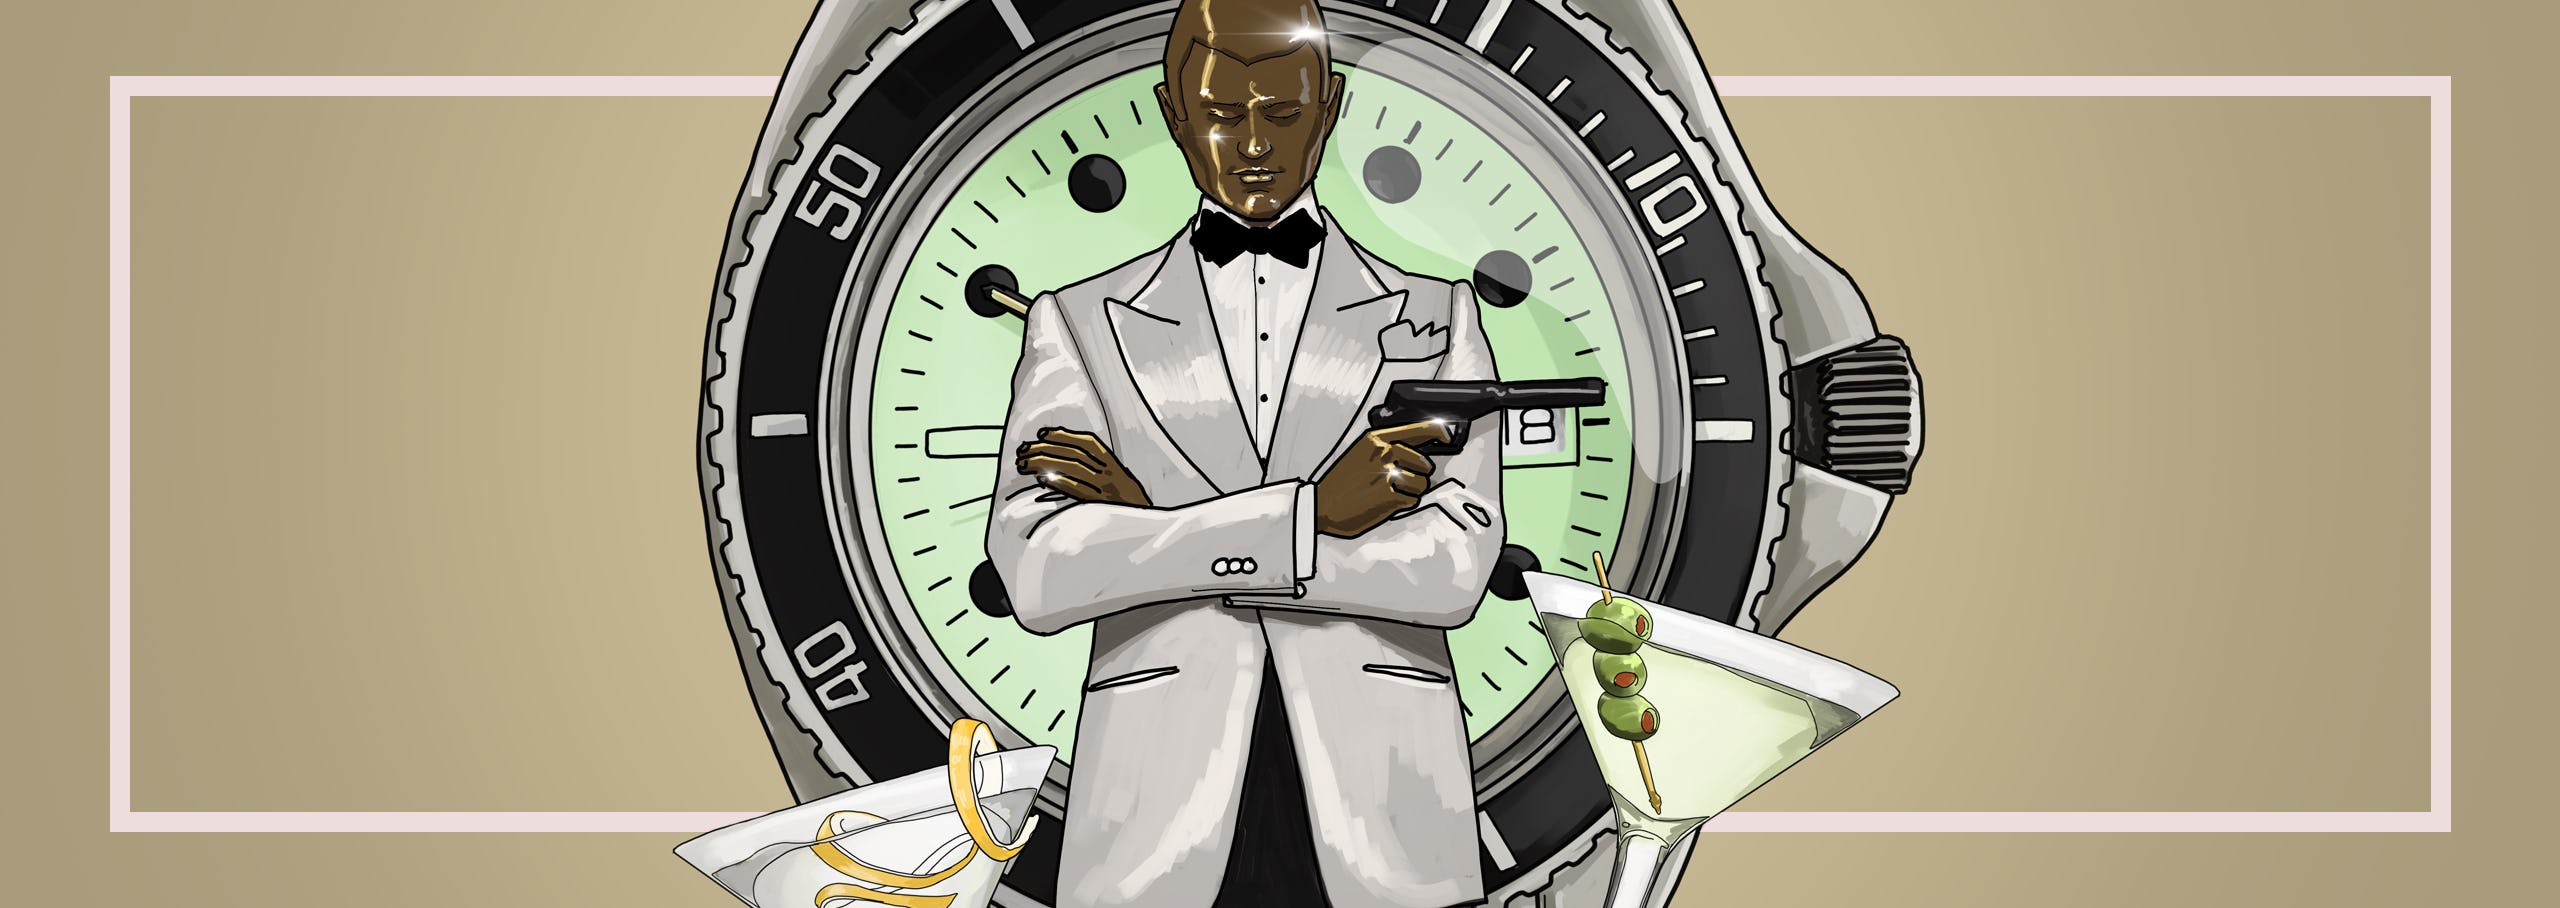 The Watches of James Bond